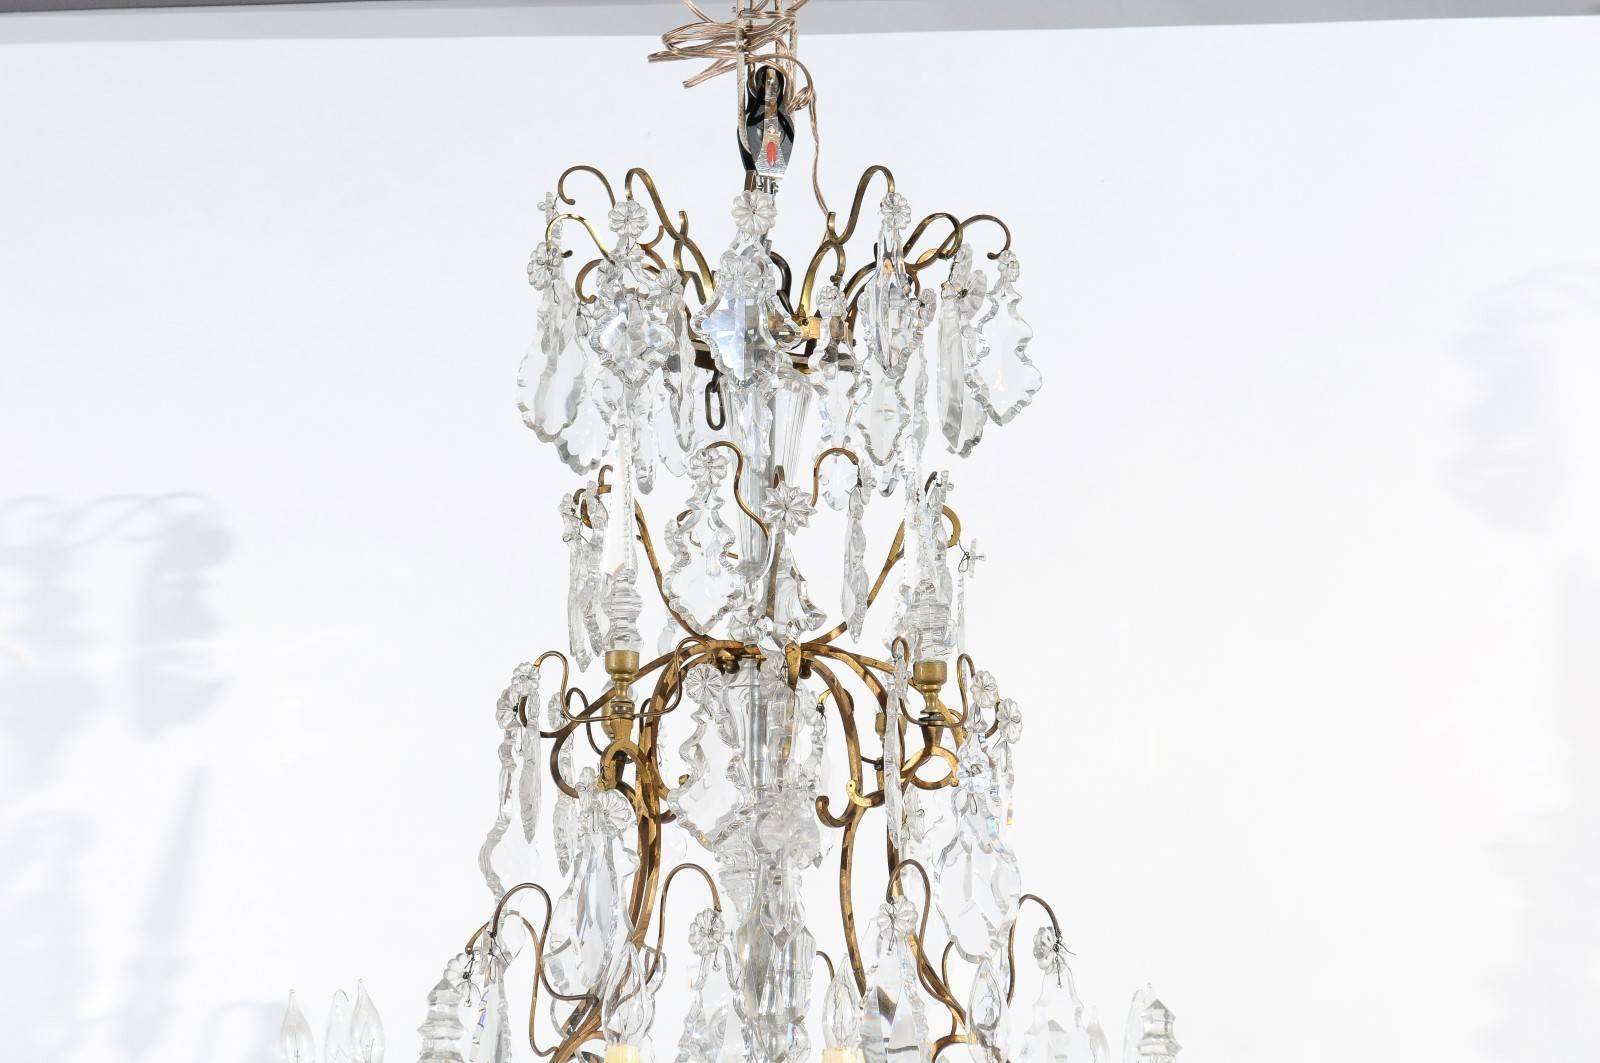 French Crystal & Bronze Louis XV Style Chandelier with 12 Lights, 19th Century France For Sale